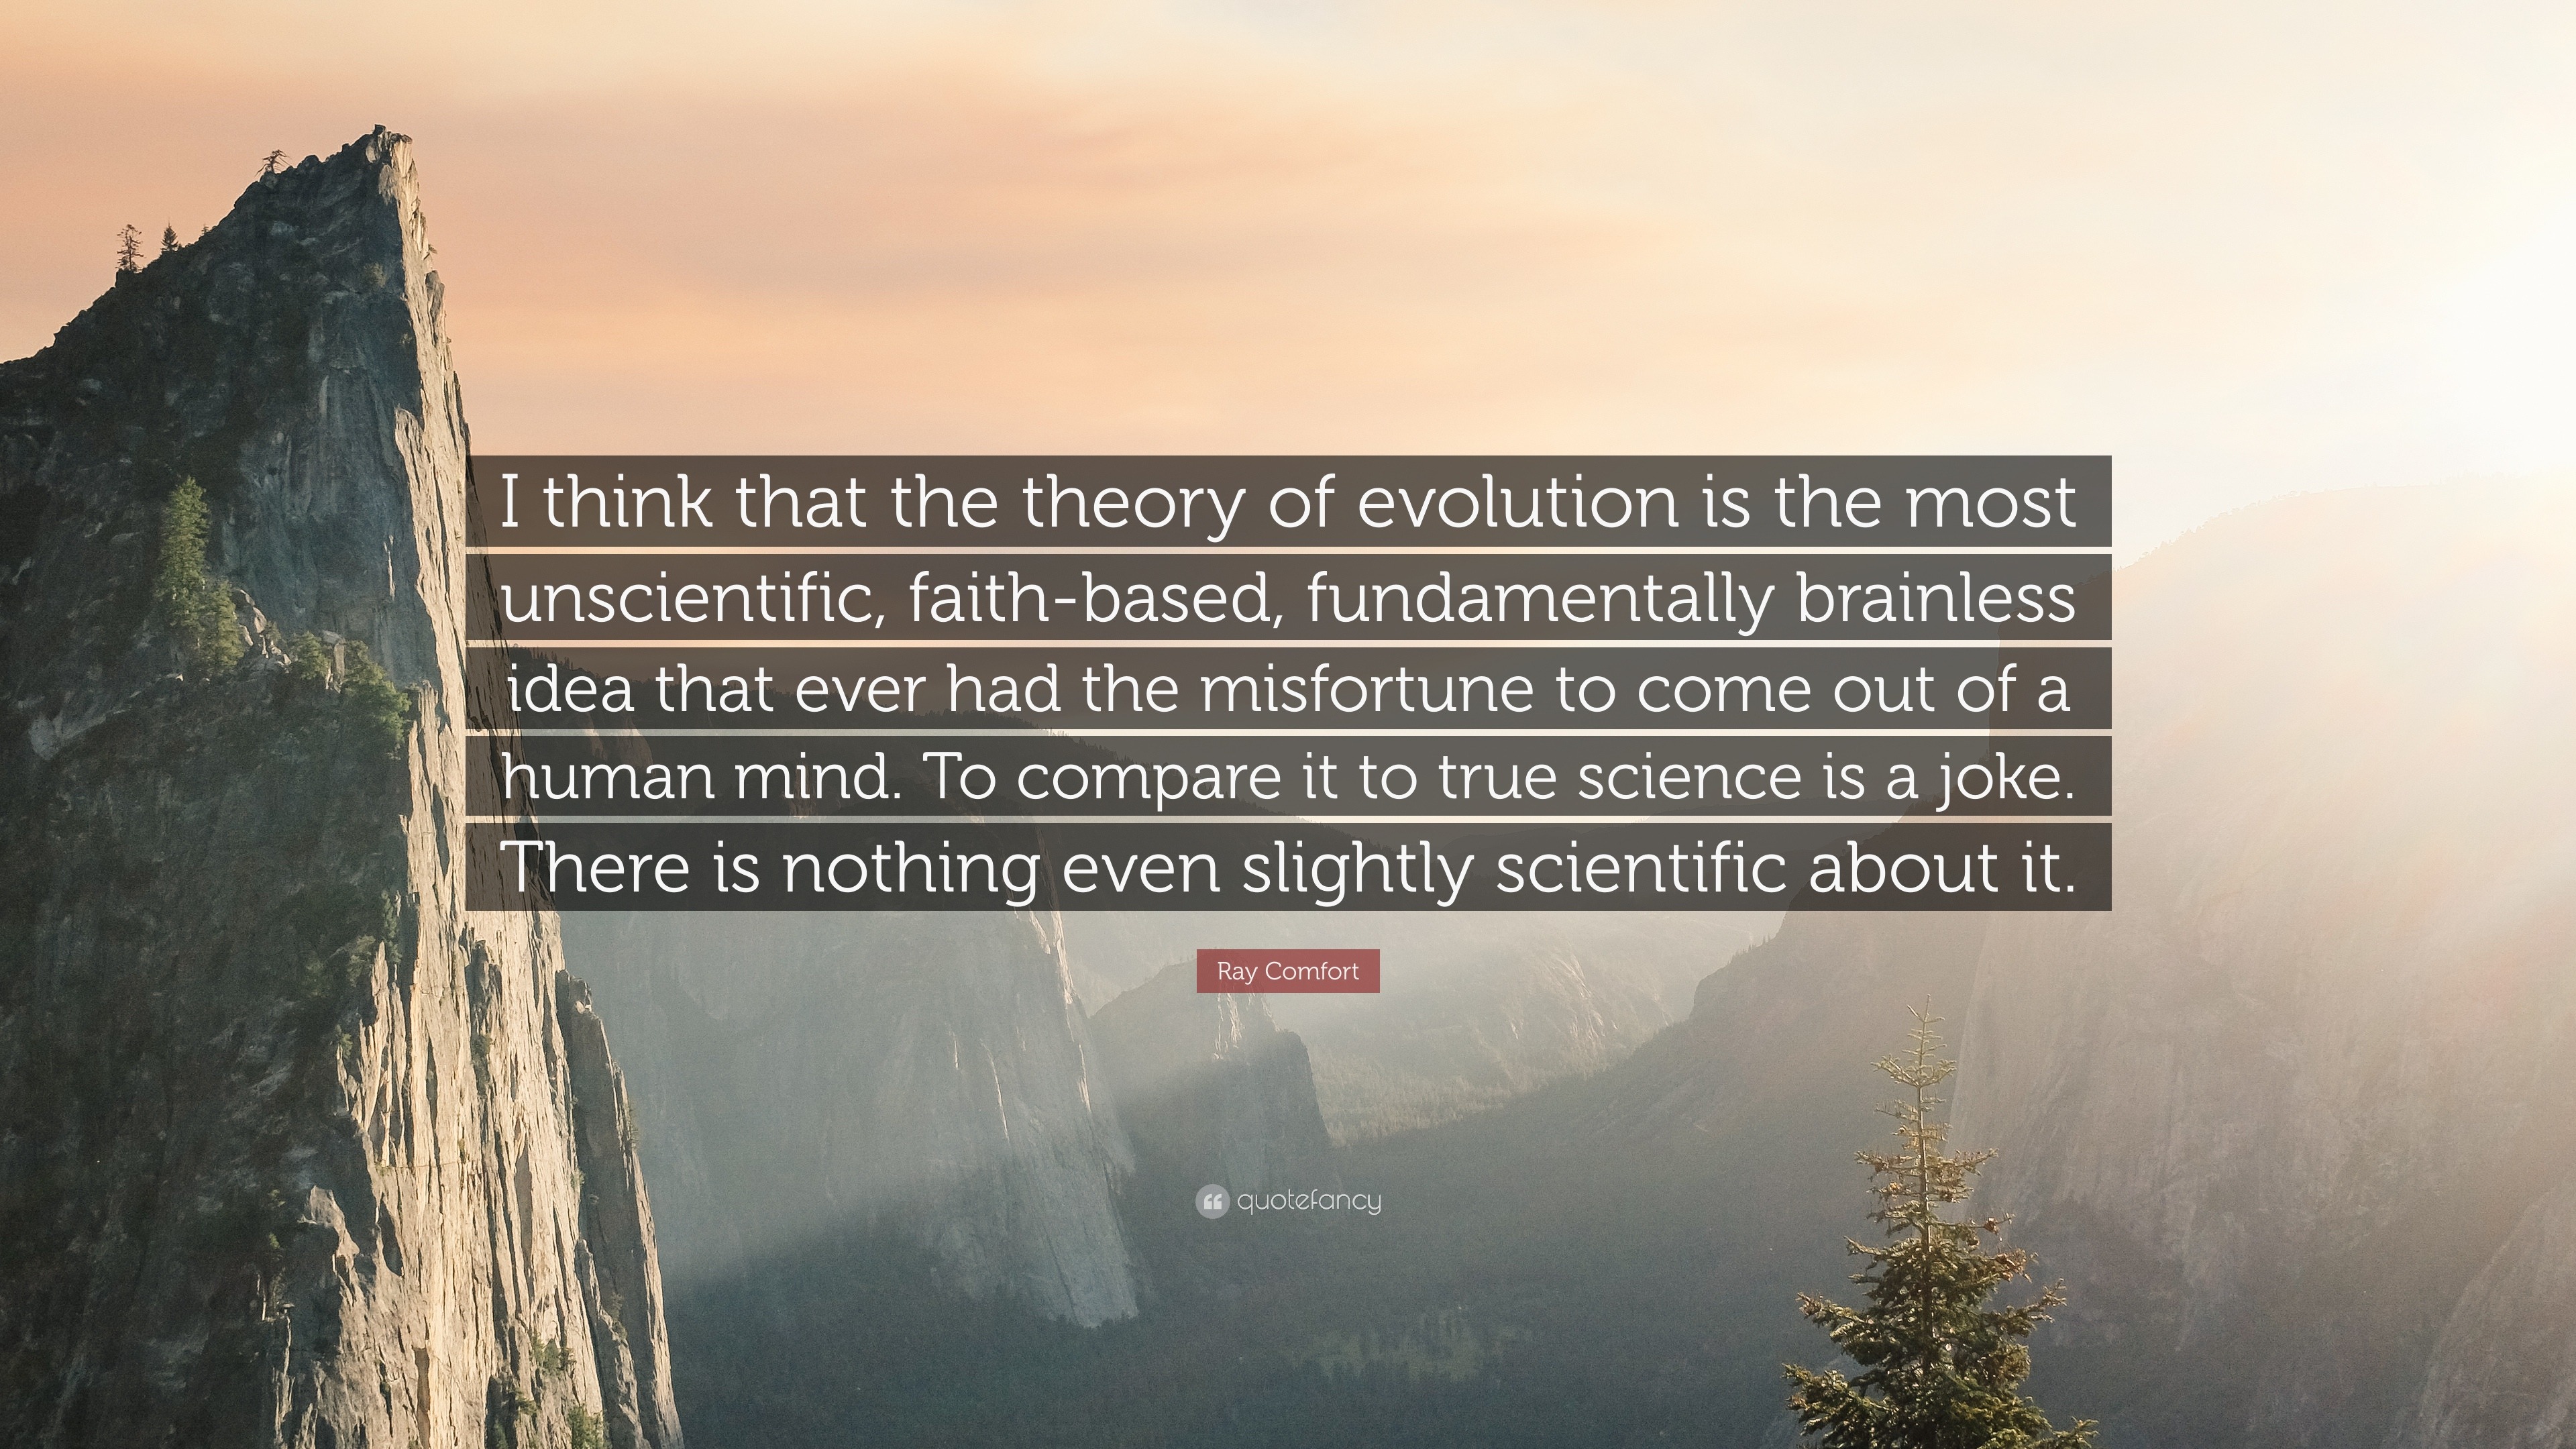 https://quotefancy.com/media/wallpaper/3840x2160/883435-Ray-Comfort-Quote-I-think-that-the-theory-of-evolution-is-the-most.jpg